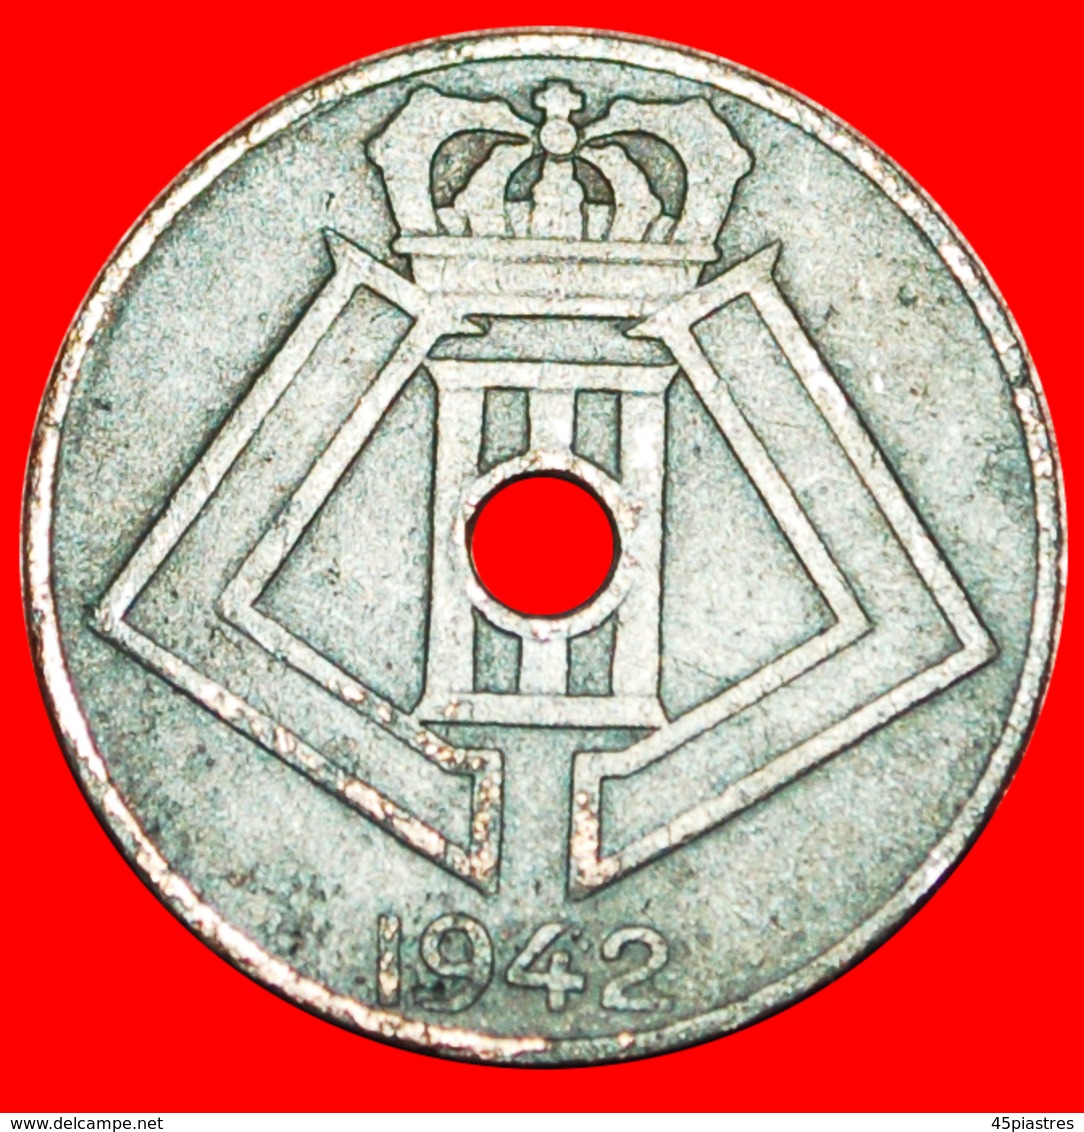 # OCCUPATION BY GERMANY~DUTCH LEGEND: BELGIUM ★ 5 CENTIMES 1942!  LOW START ★ NO RESERVE! Leopold III (1934-1950) - 5 Cents